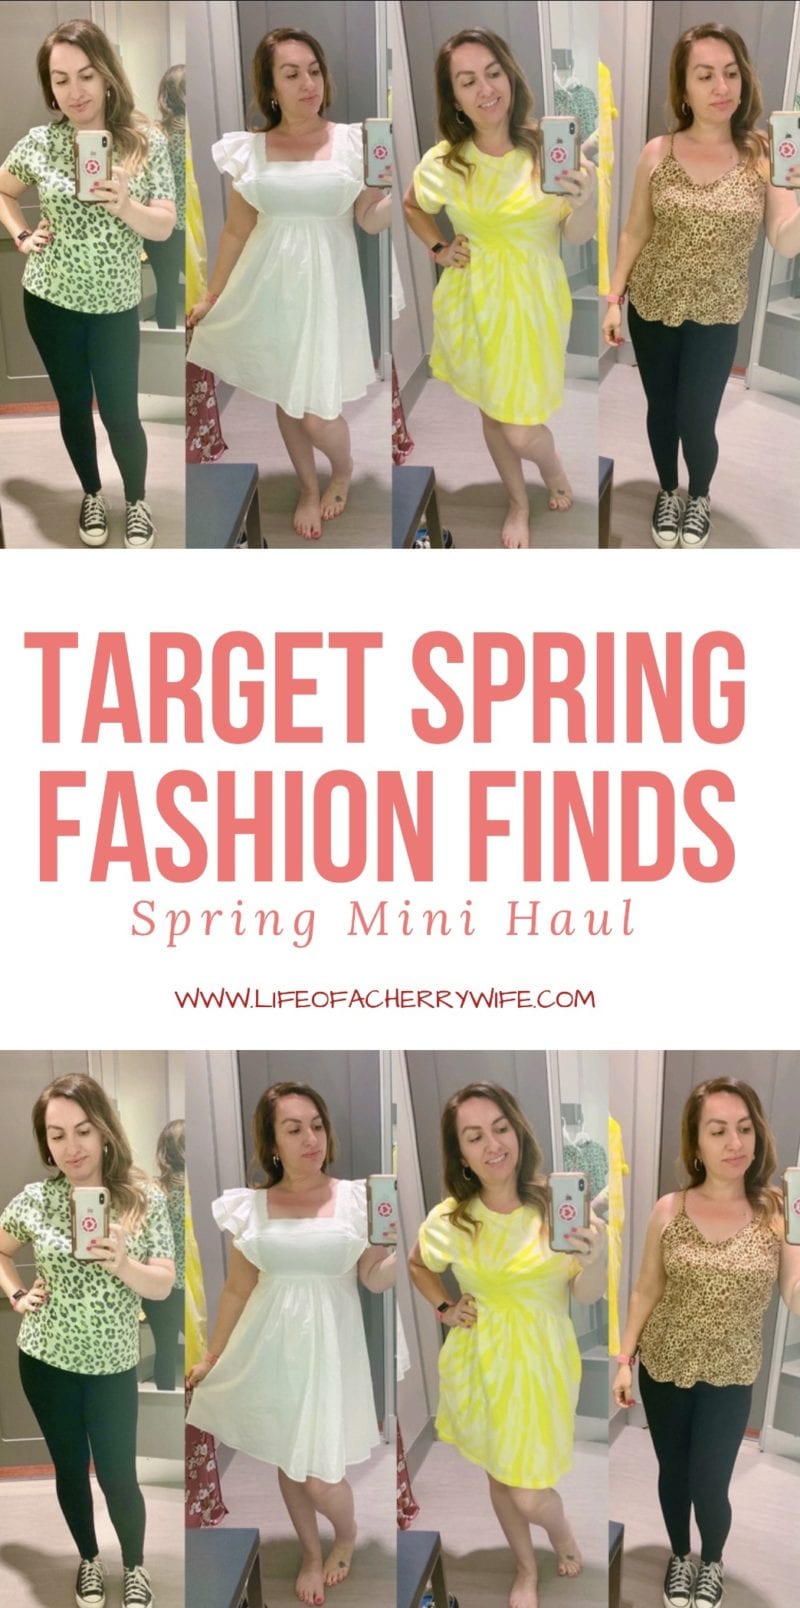 Target Spring Mini Haul Fashion Finds - Life of a Cherry Wife